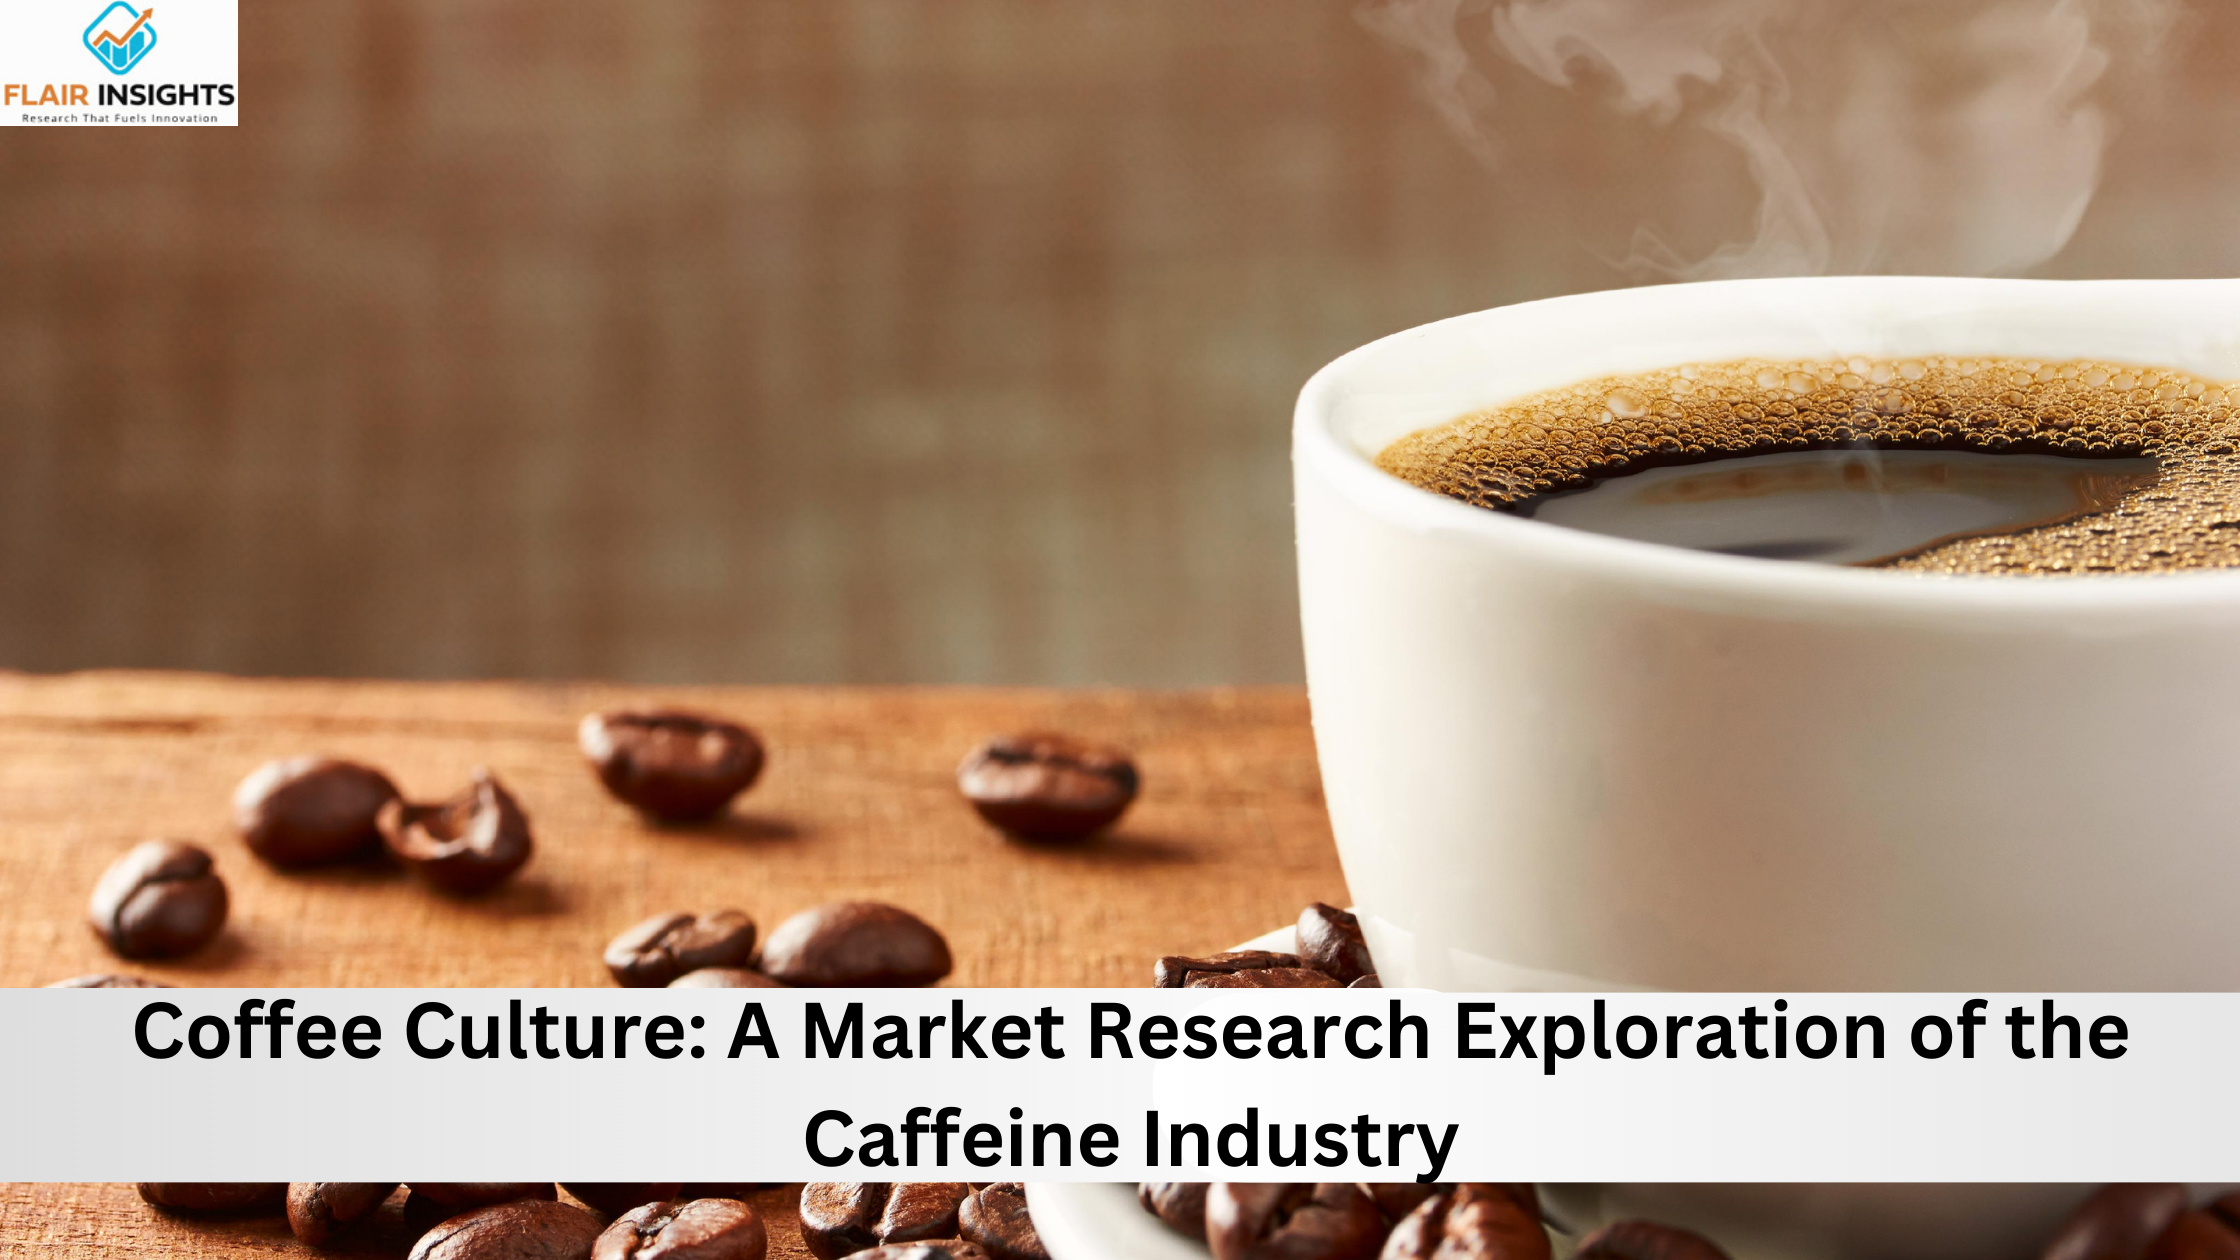 Coffee Culture: A Market Research Exploration of the Caffeine Industry